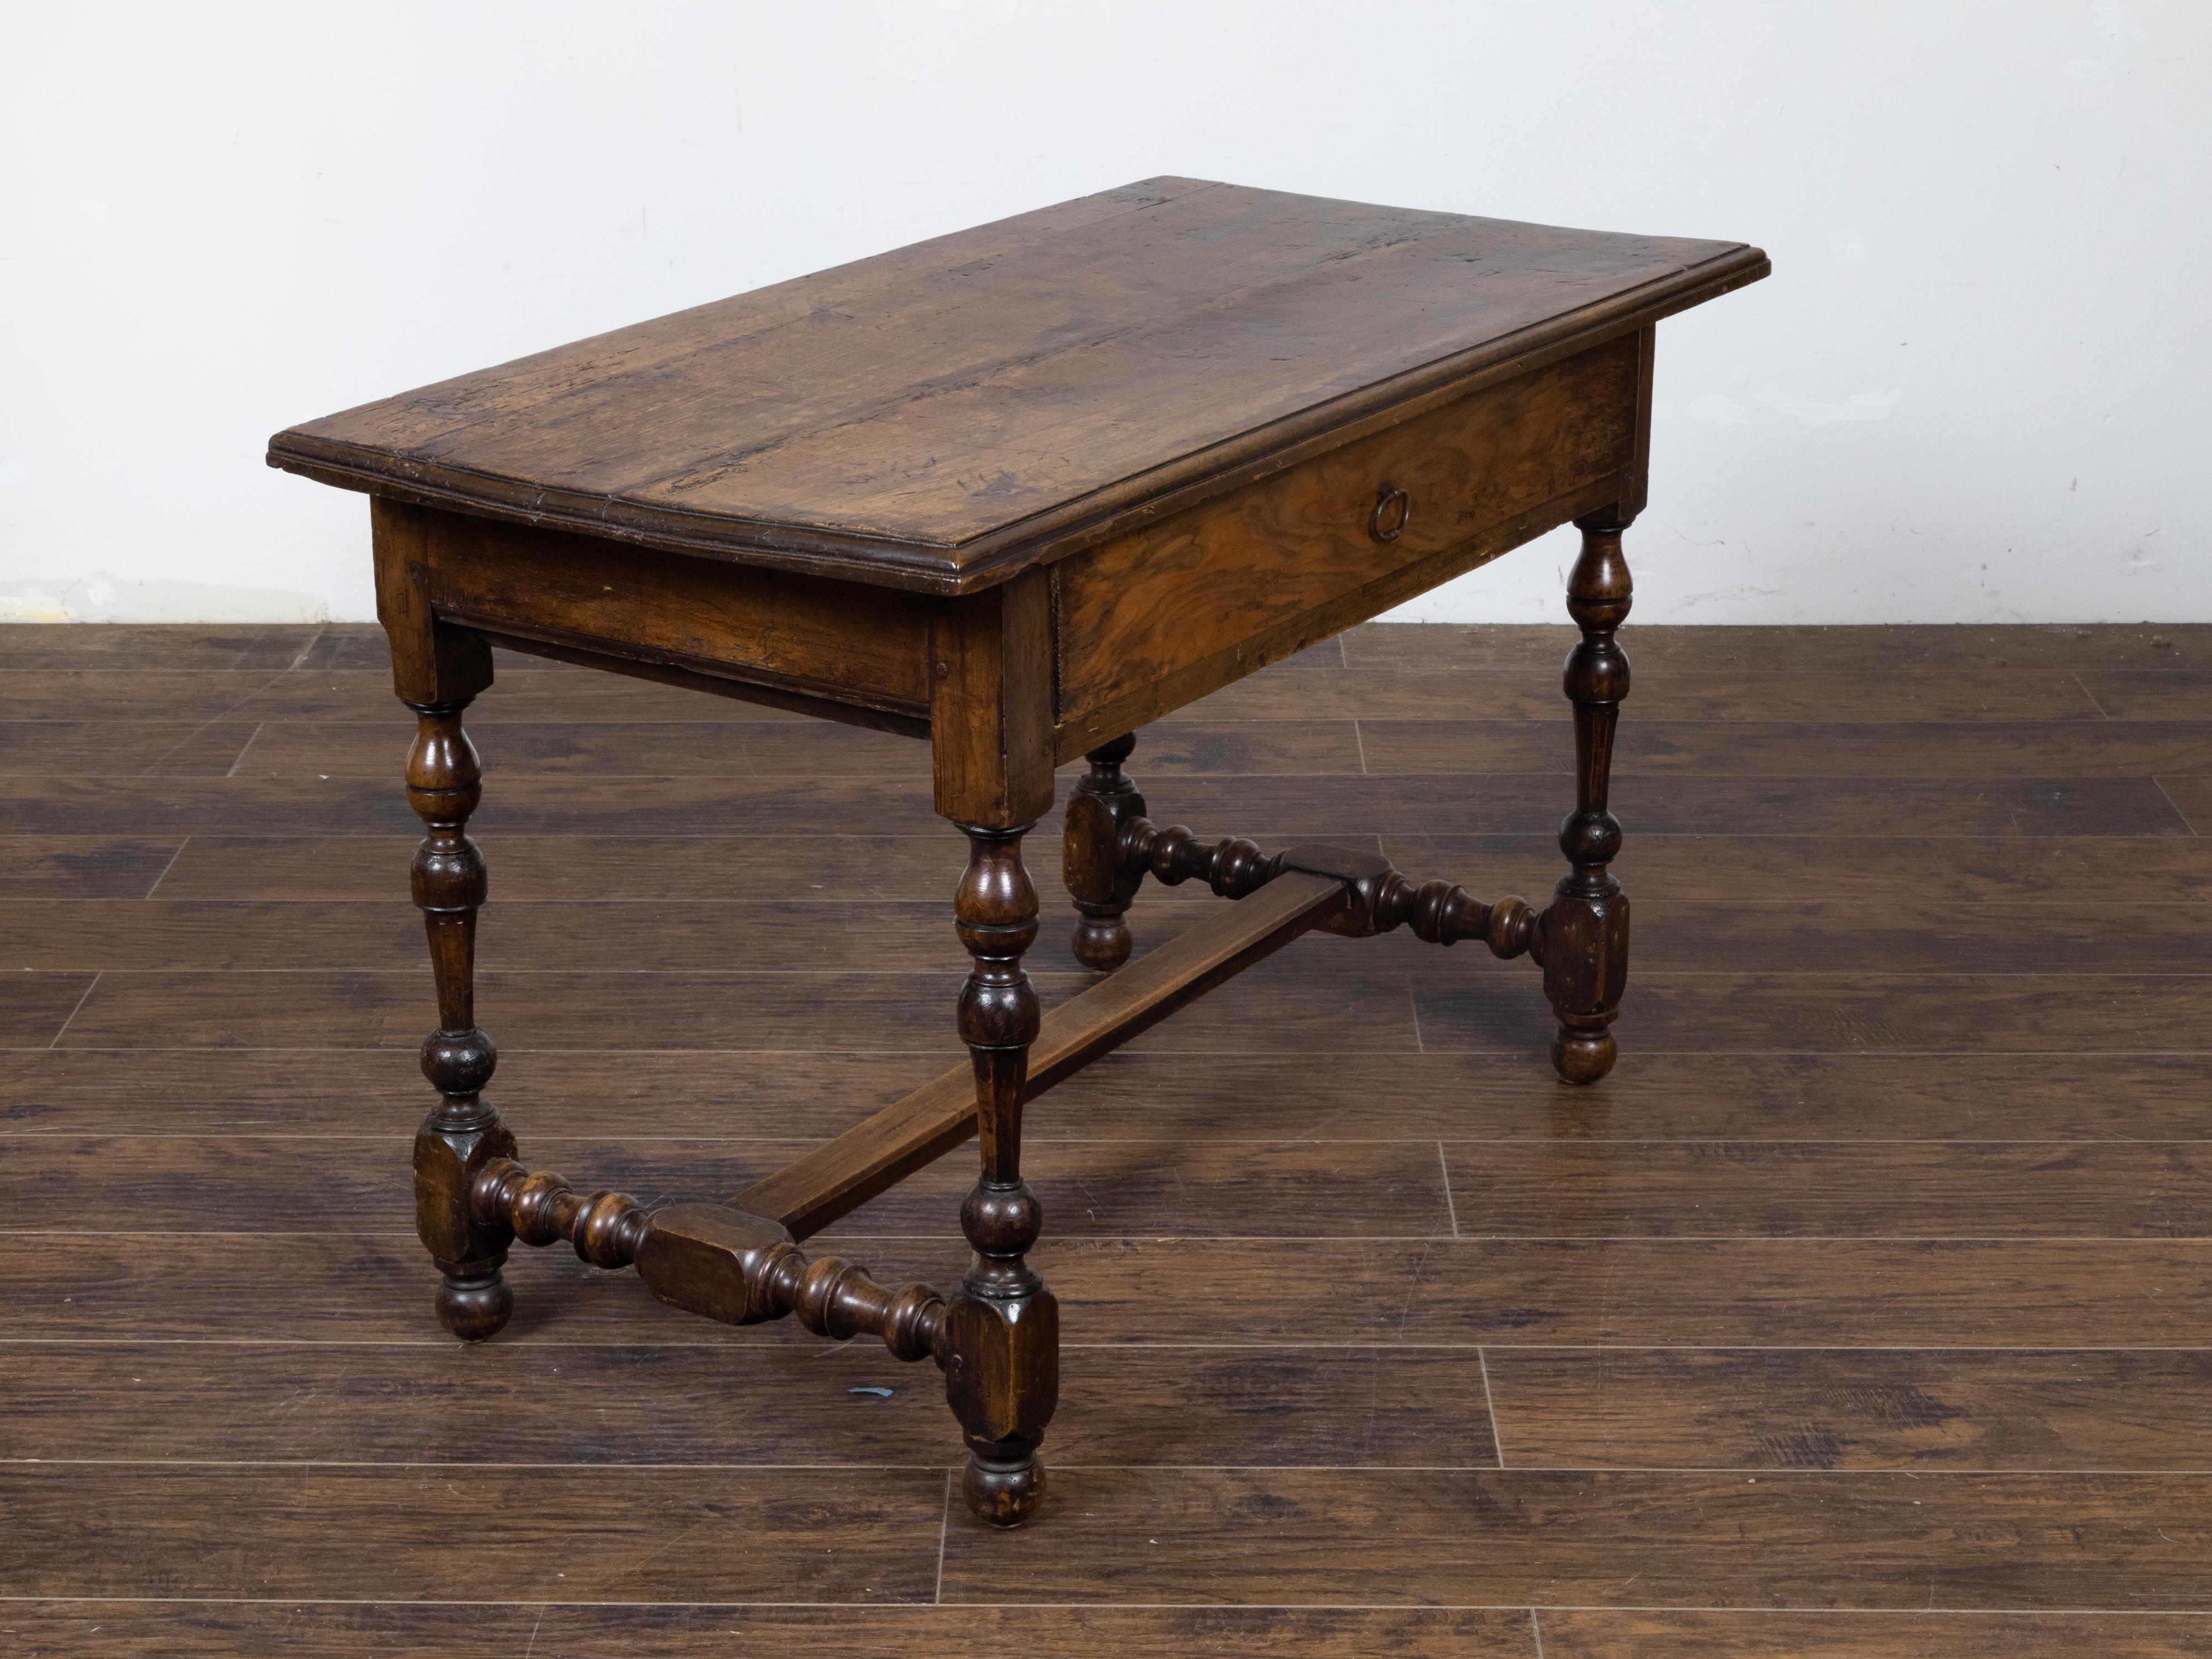 An English Georgian period walnut table circa 1800 with rectangular top, beveled edges, single drawer, slender turned baluster legs on ball feet and H-Form cross stretcher. Radiating an undeniable charm, this English Georgian period walnut table,